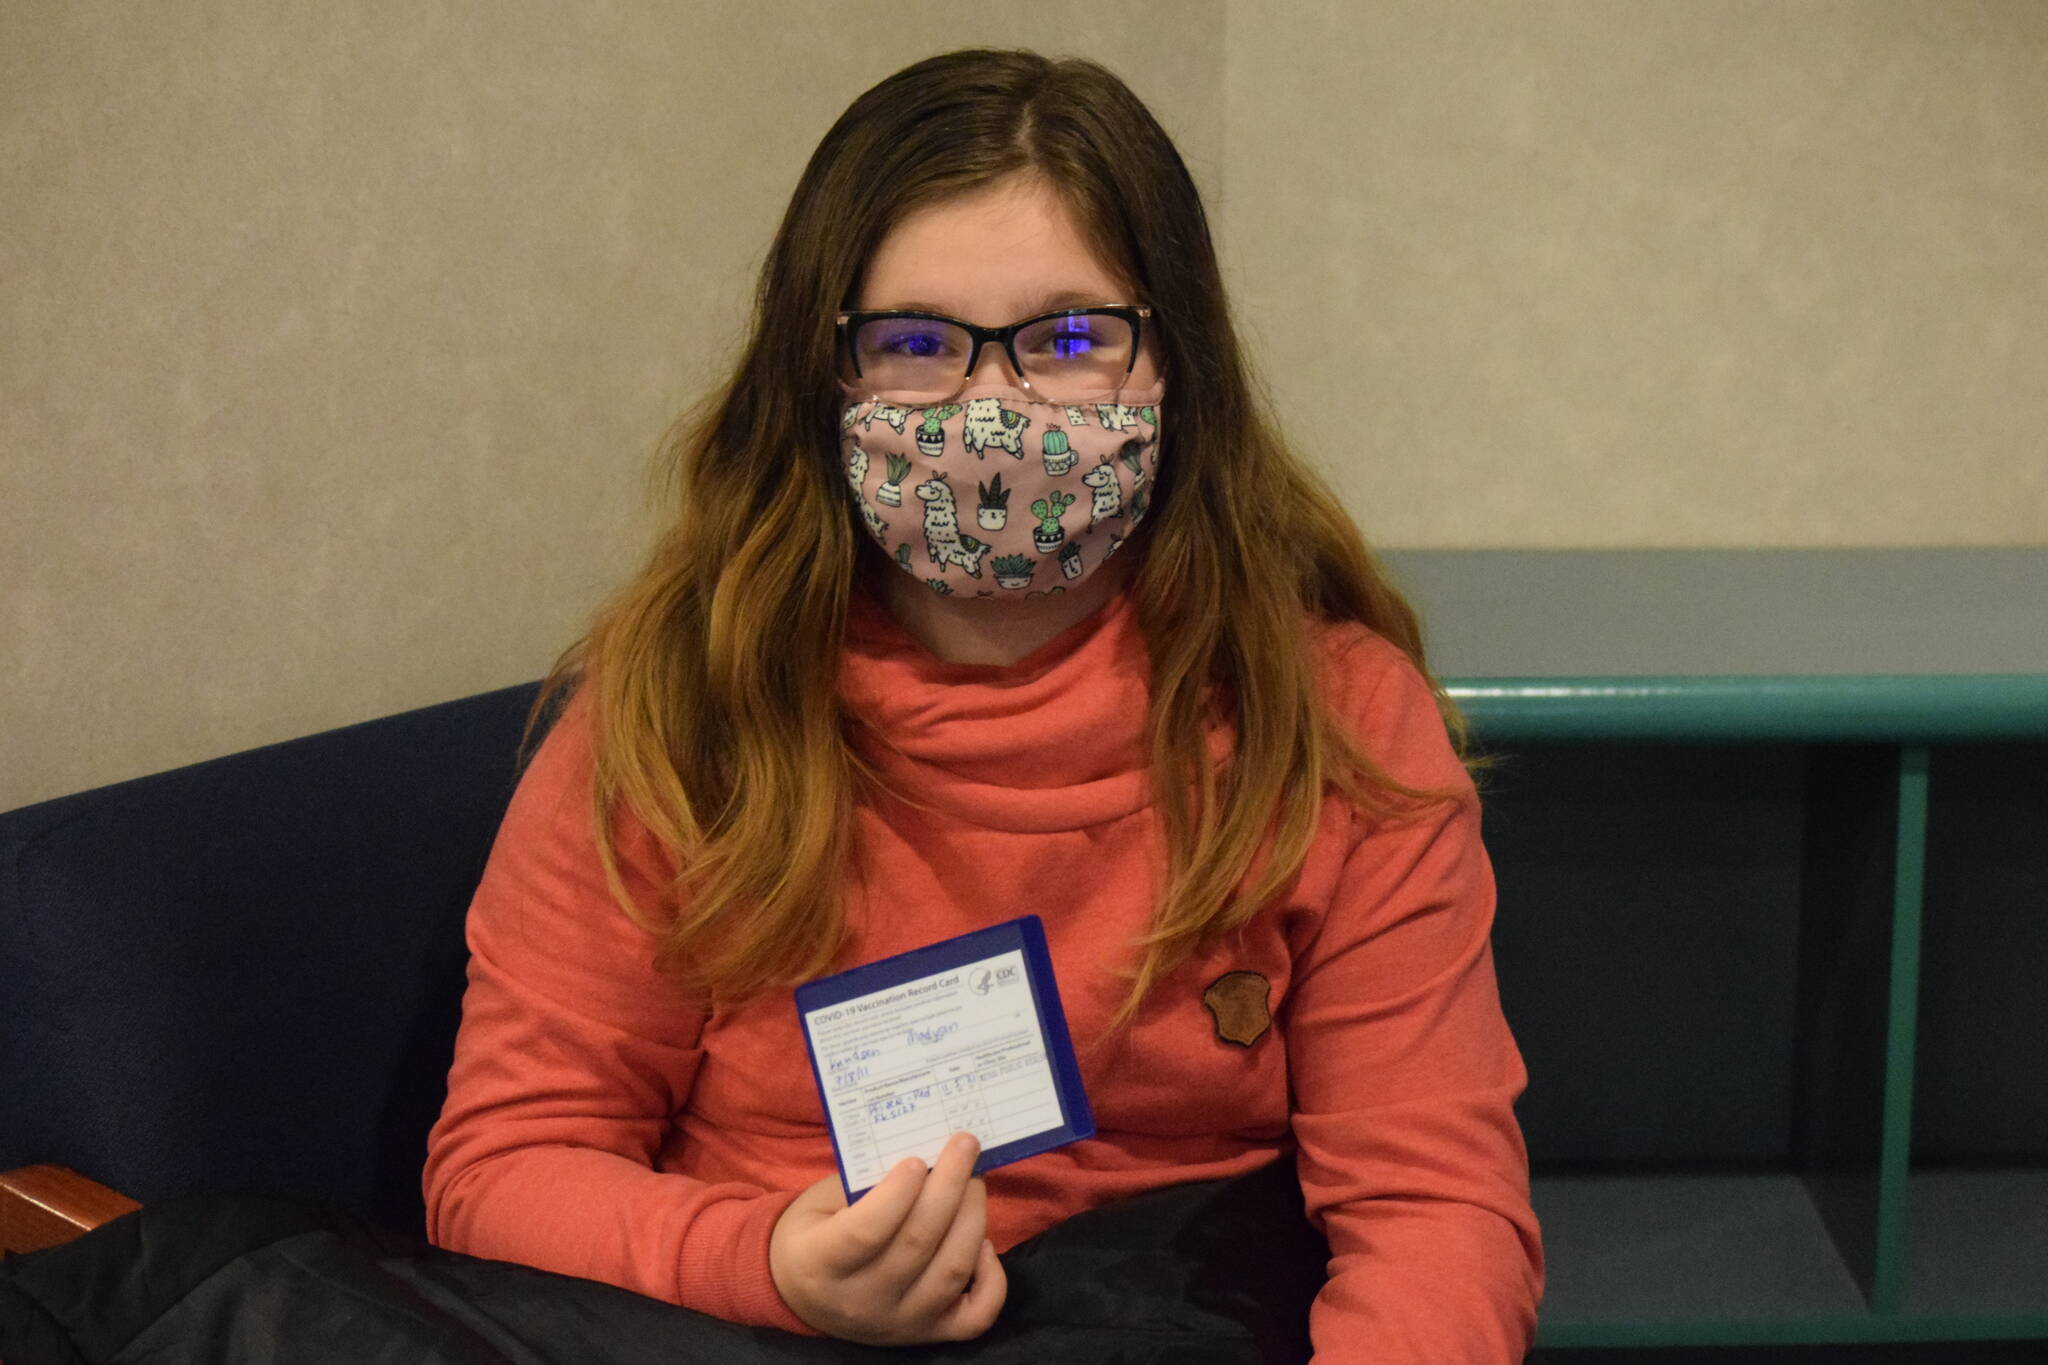 Madyson Knudsen, 10, holds up her COVID-19 vaccine card after receiving her first pediatric shot the Kenai Public Health Center on Friday, Nov. 5, 2021. The Centers for Disease Control and Prevention extended the emergency use authorization of the Pfizer-BioNTech vaccine to include kids ages 5 to 11 this week. (Camille Botello/Peninsula Clarion)